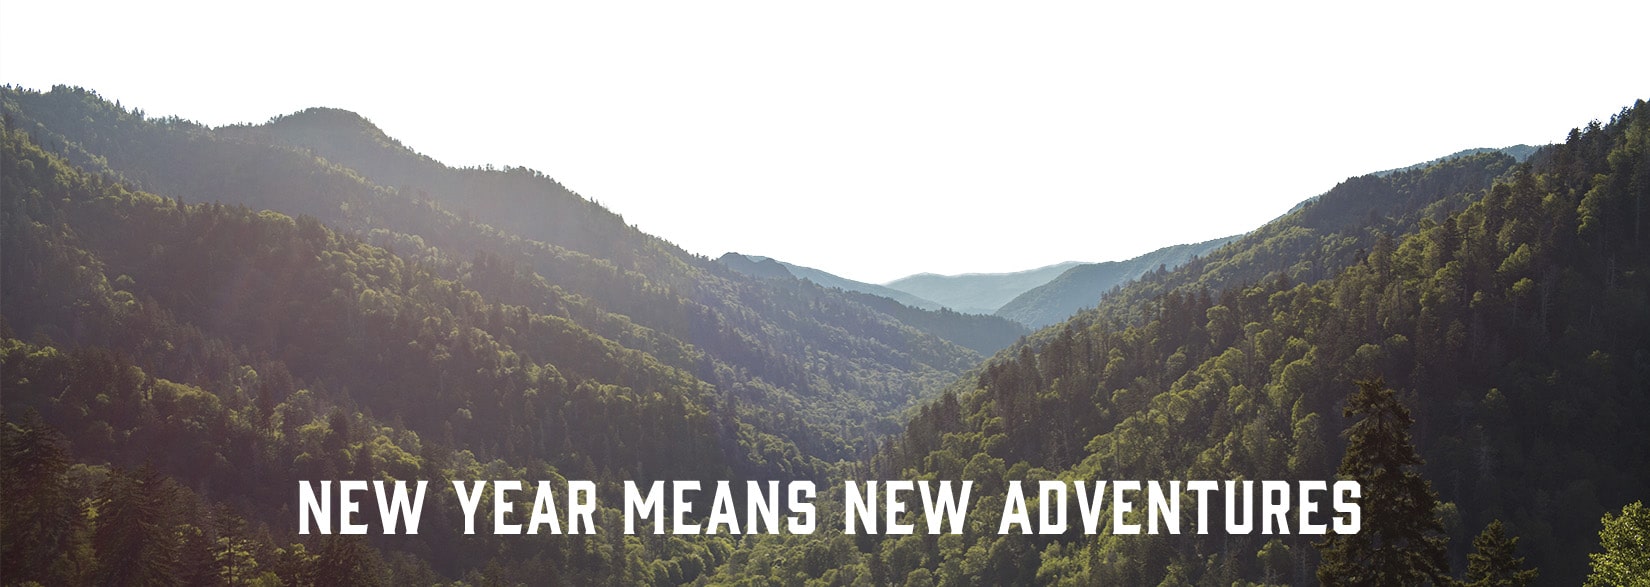 New Year means new adventures.